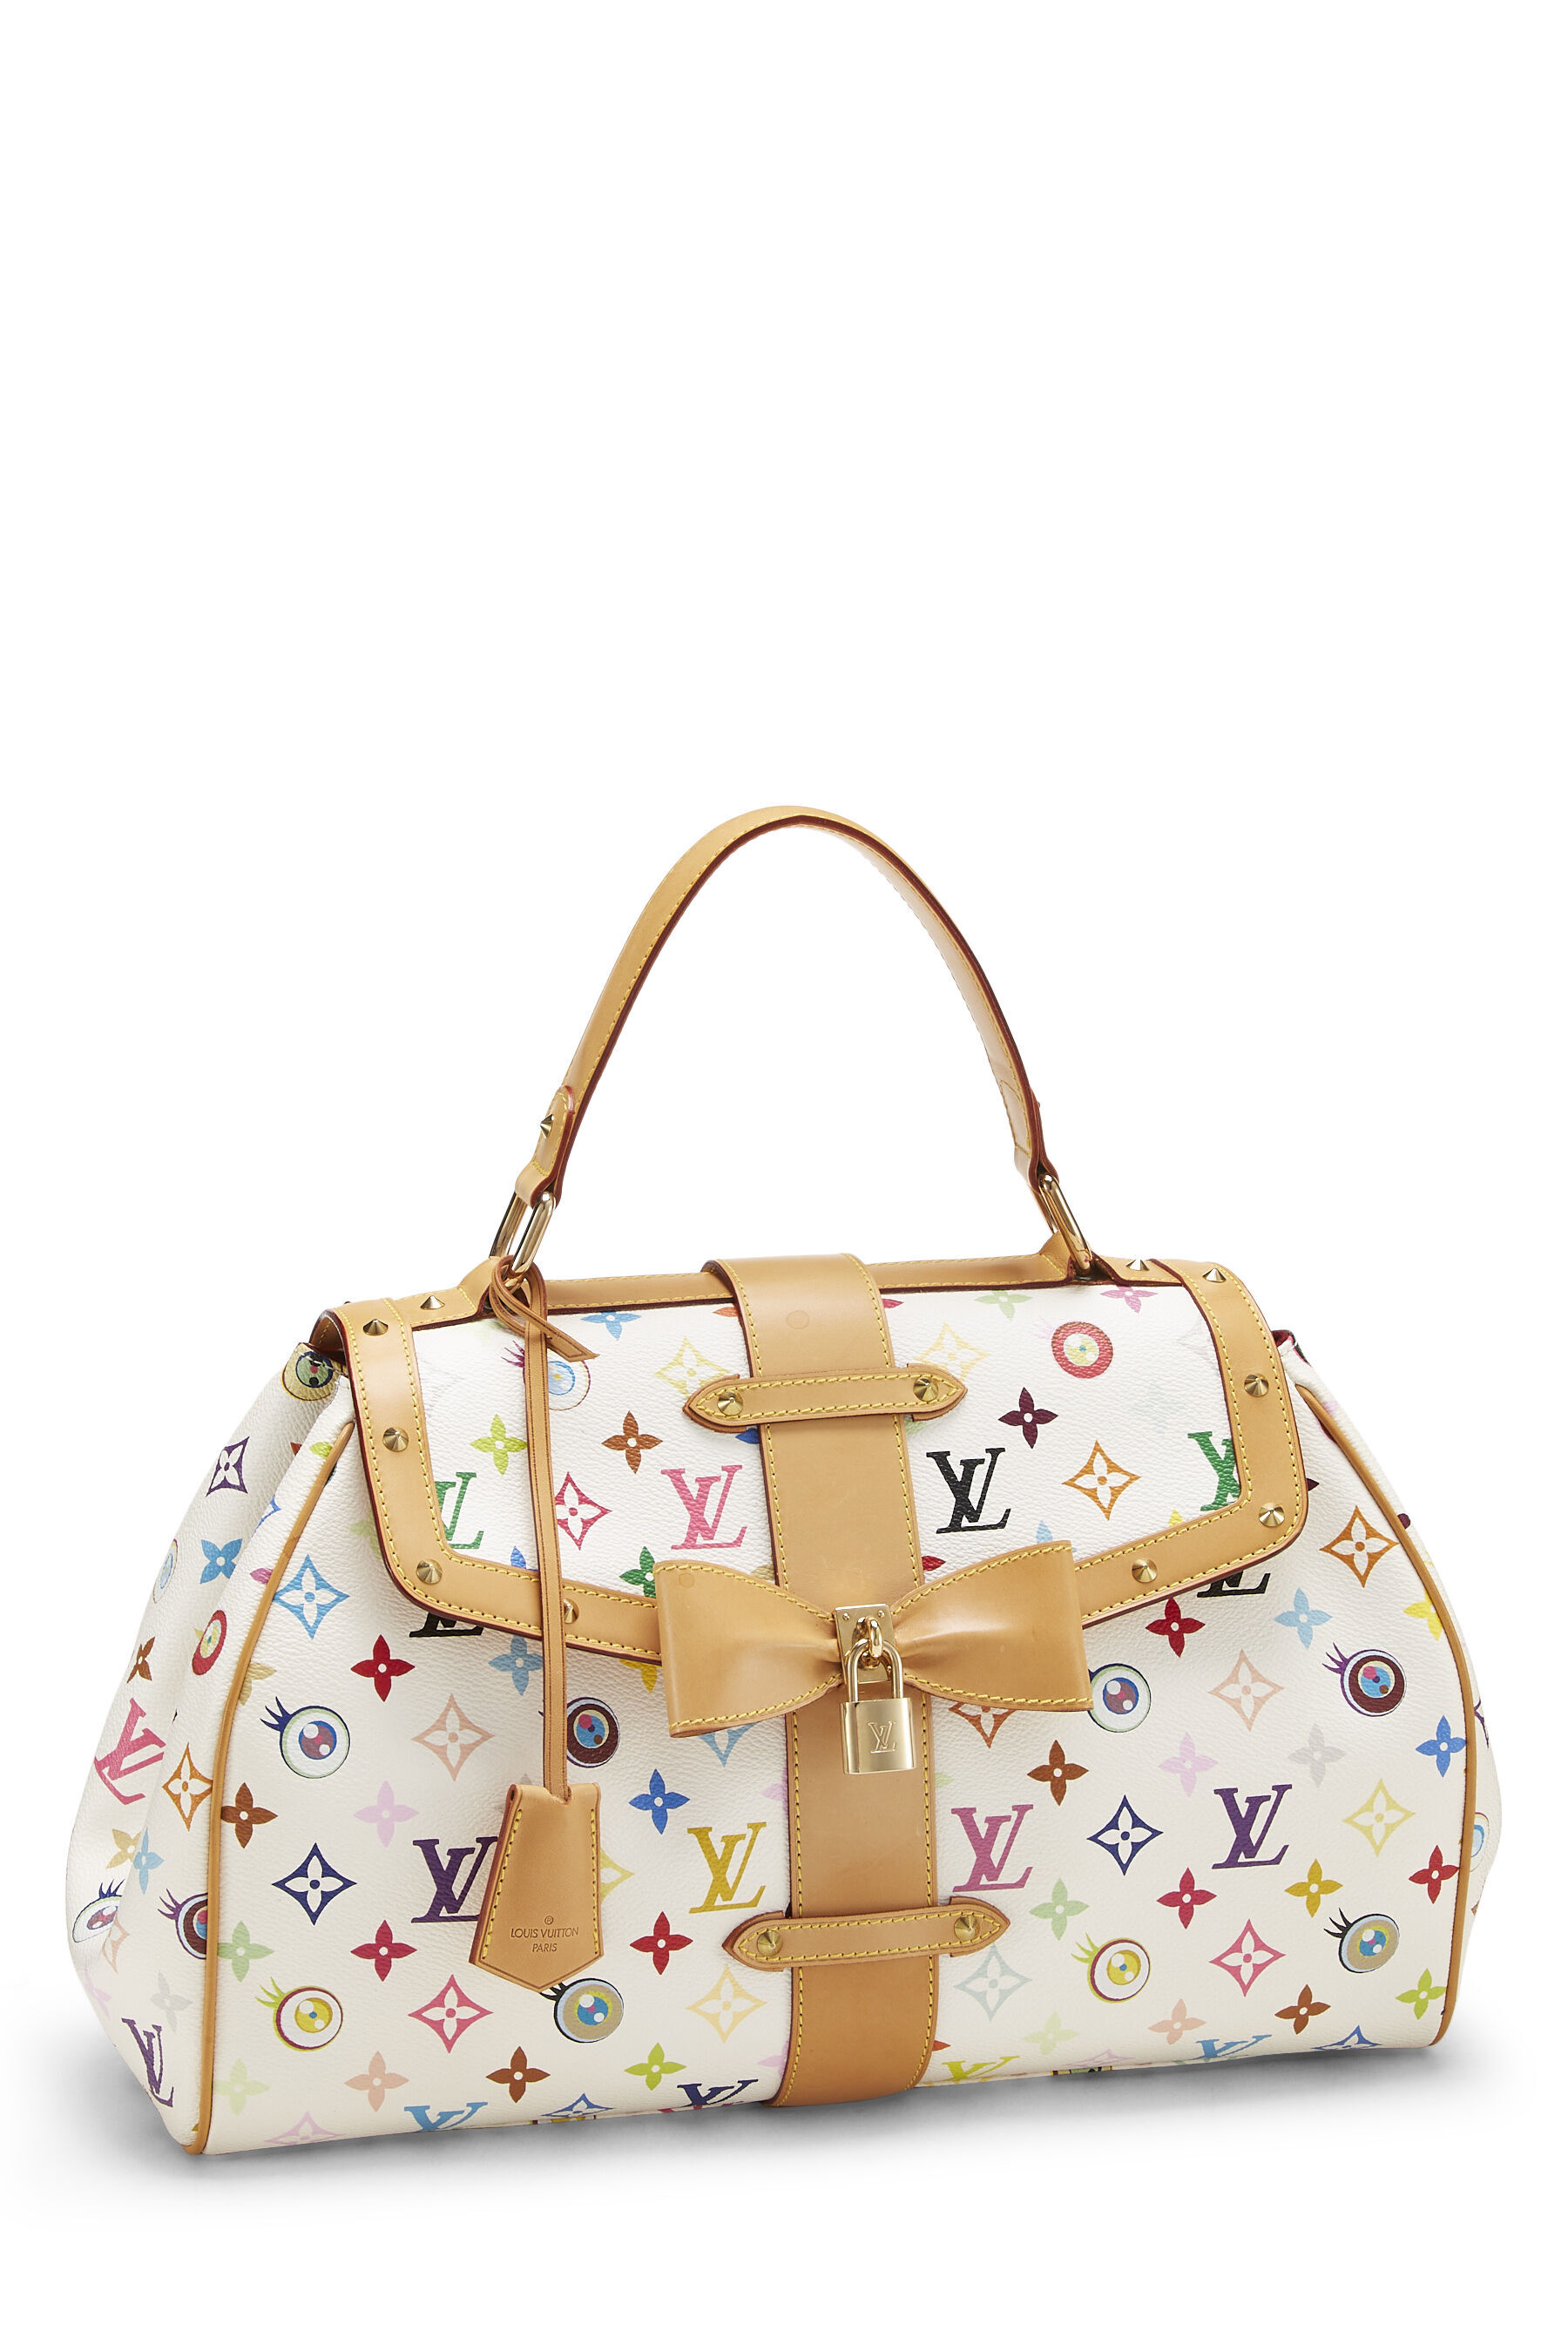 3 Louis Vuitton Mom Bags | Gallery posted by Ana Navabi | Lemon8